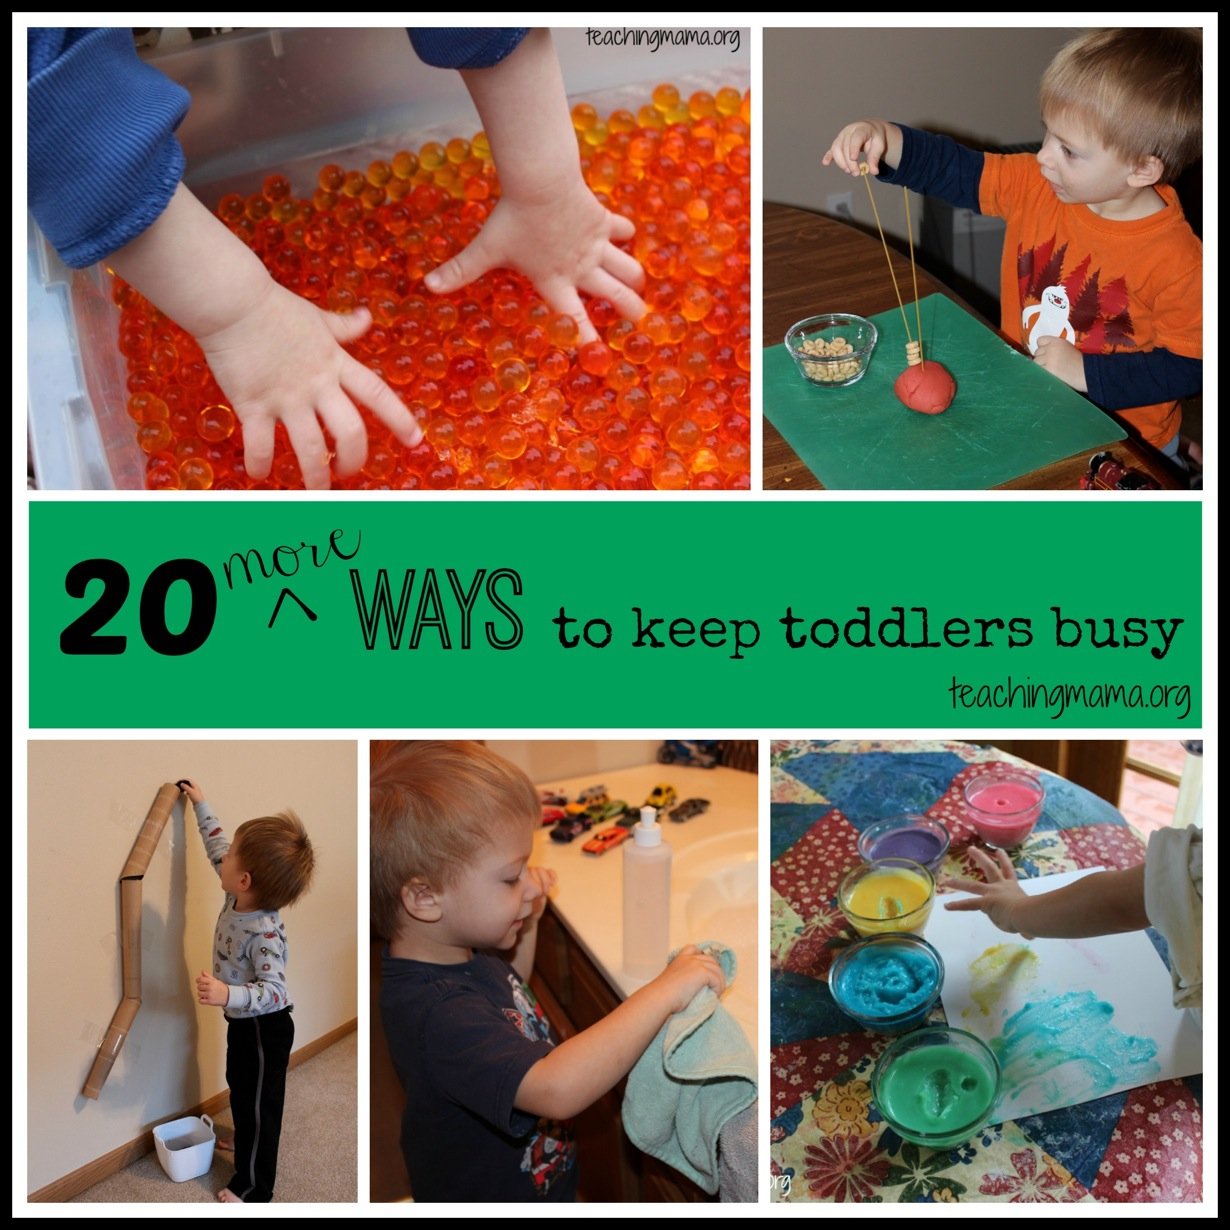 20 More Ways to Keept Toddlers Busy